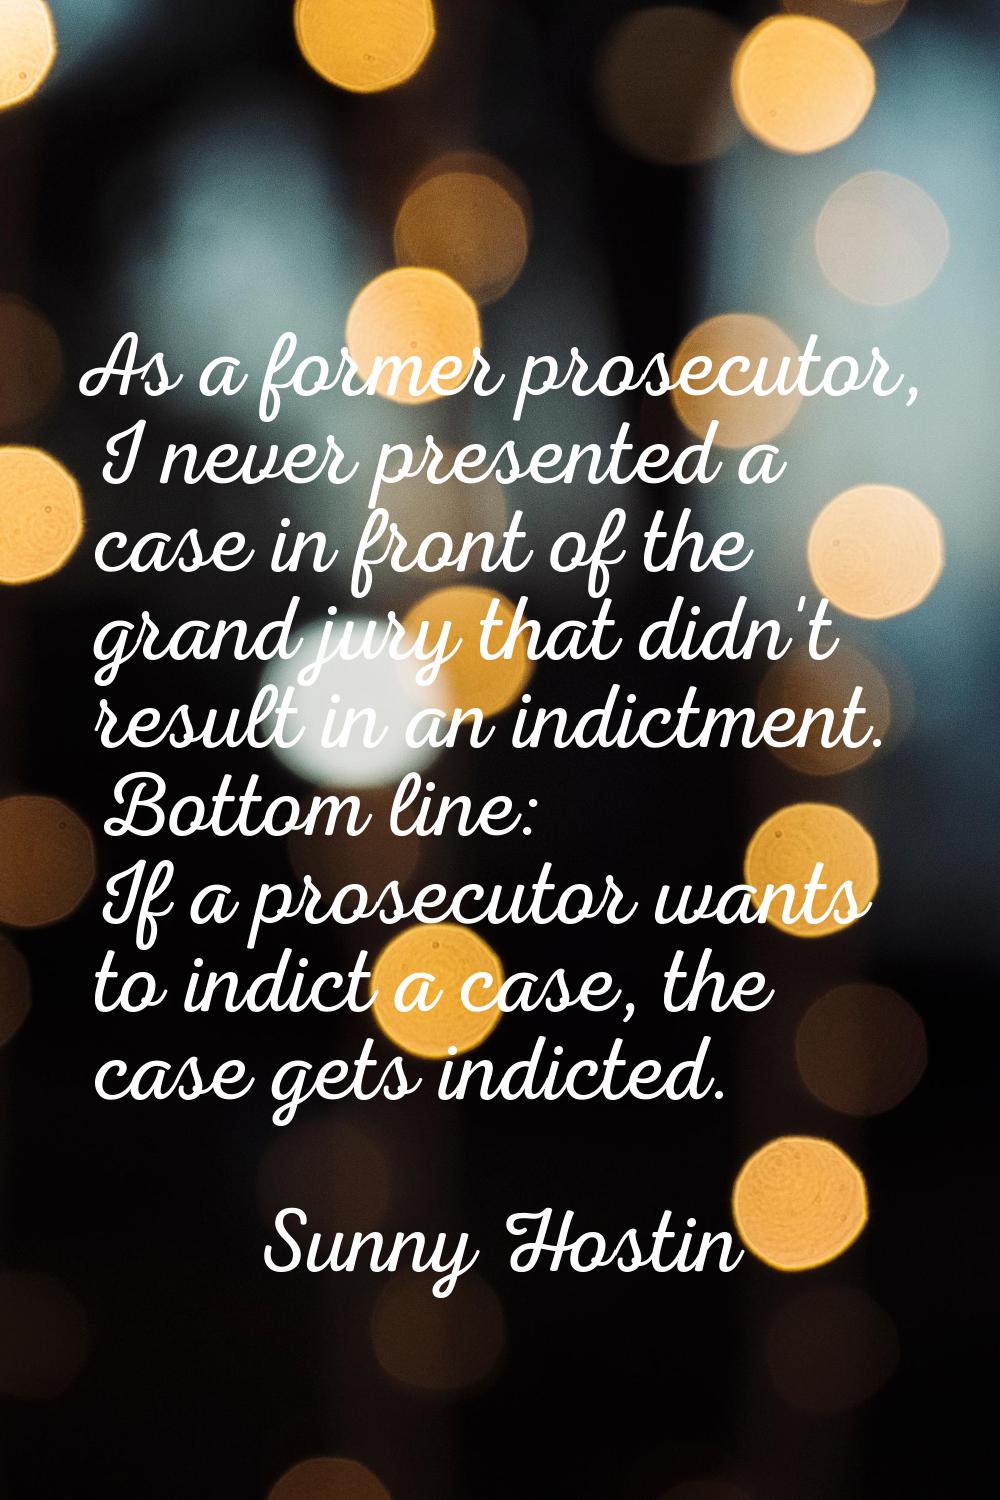 As a former prosecutor, I never presented a case in front of the grand jury that didn't result in a